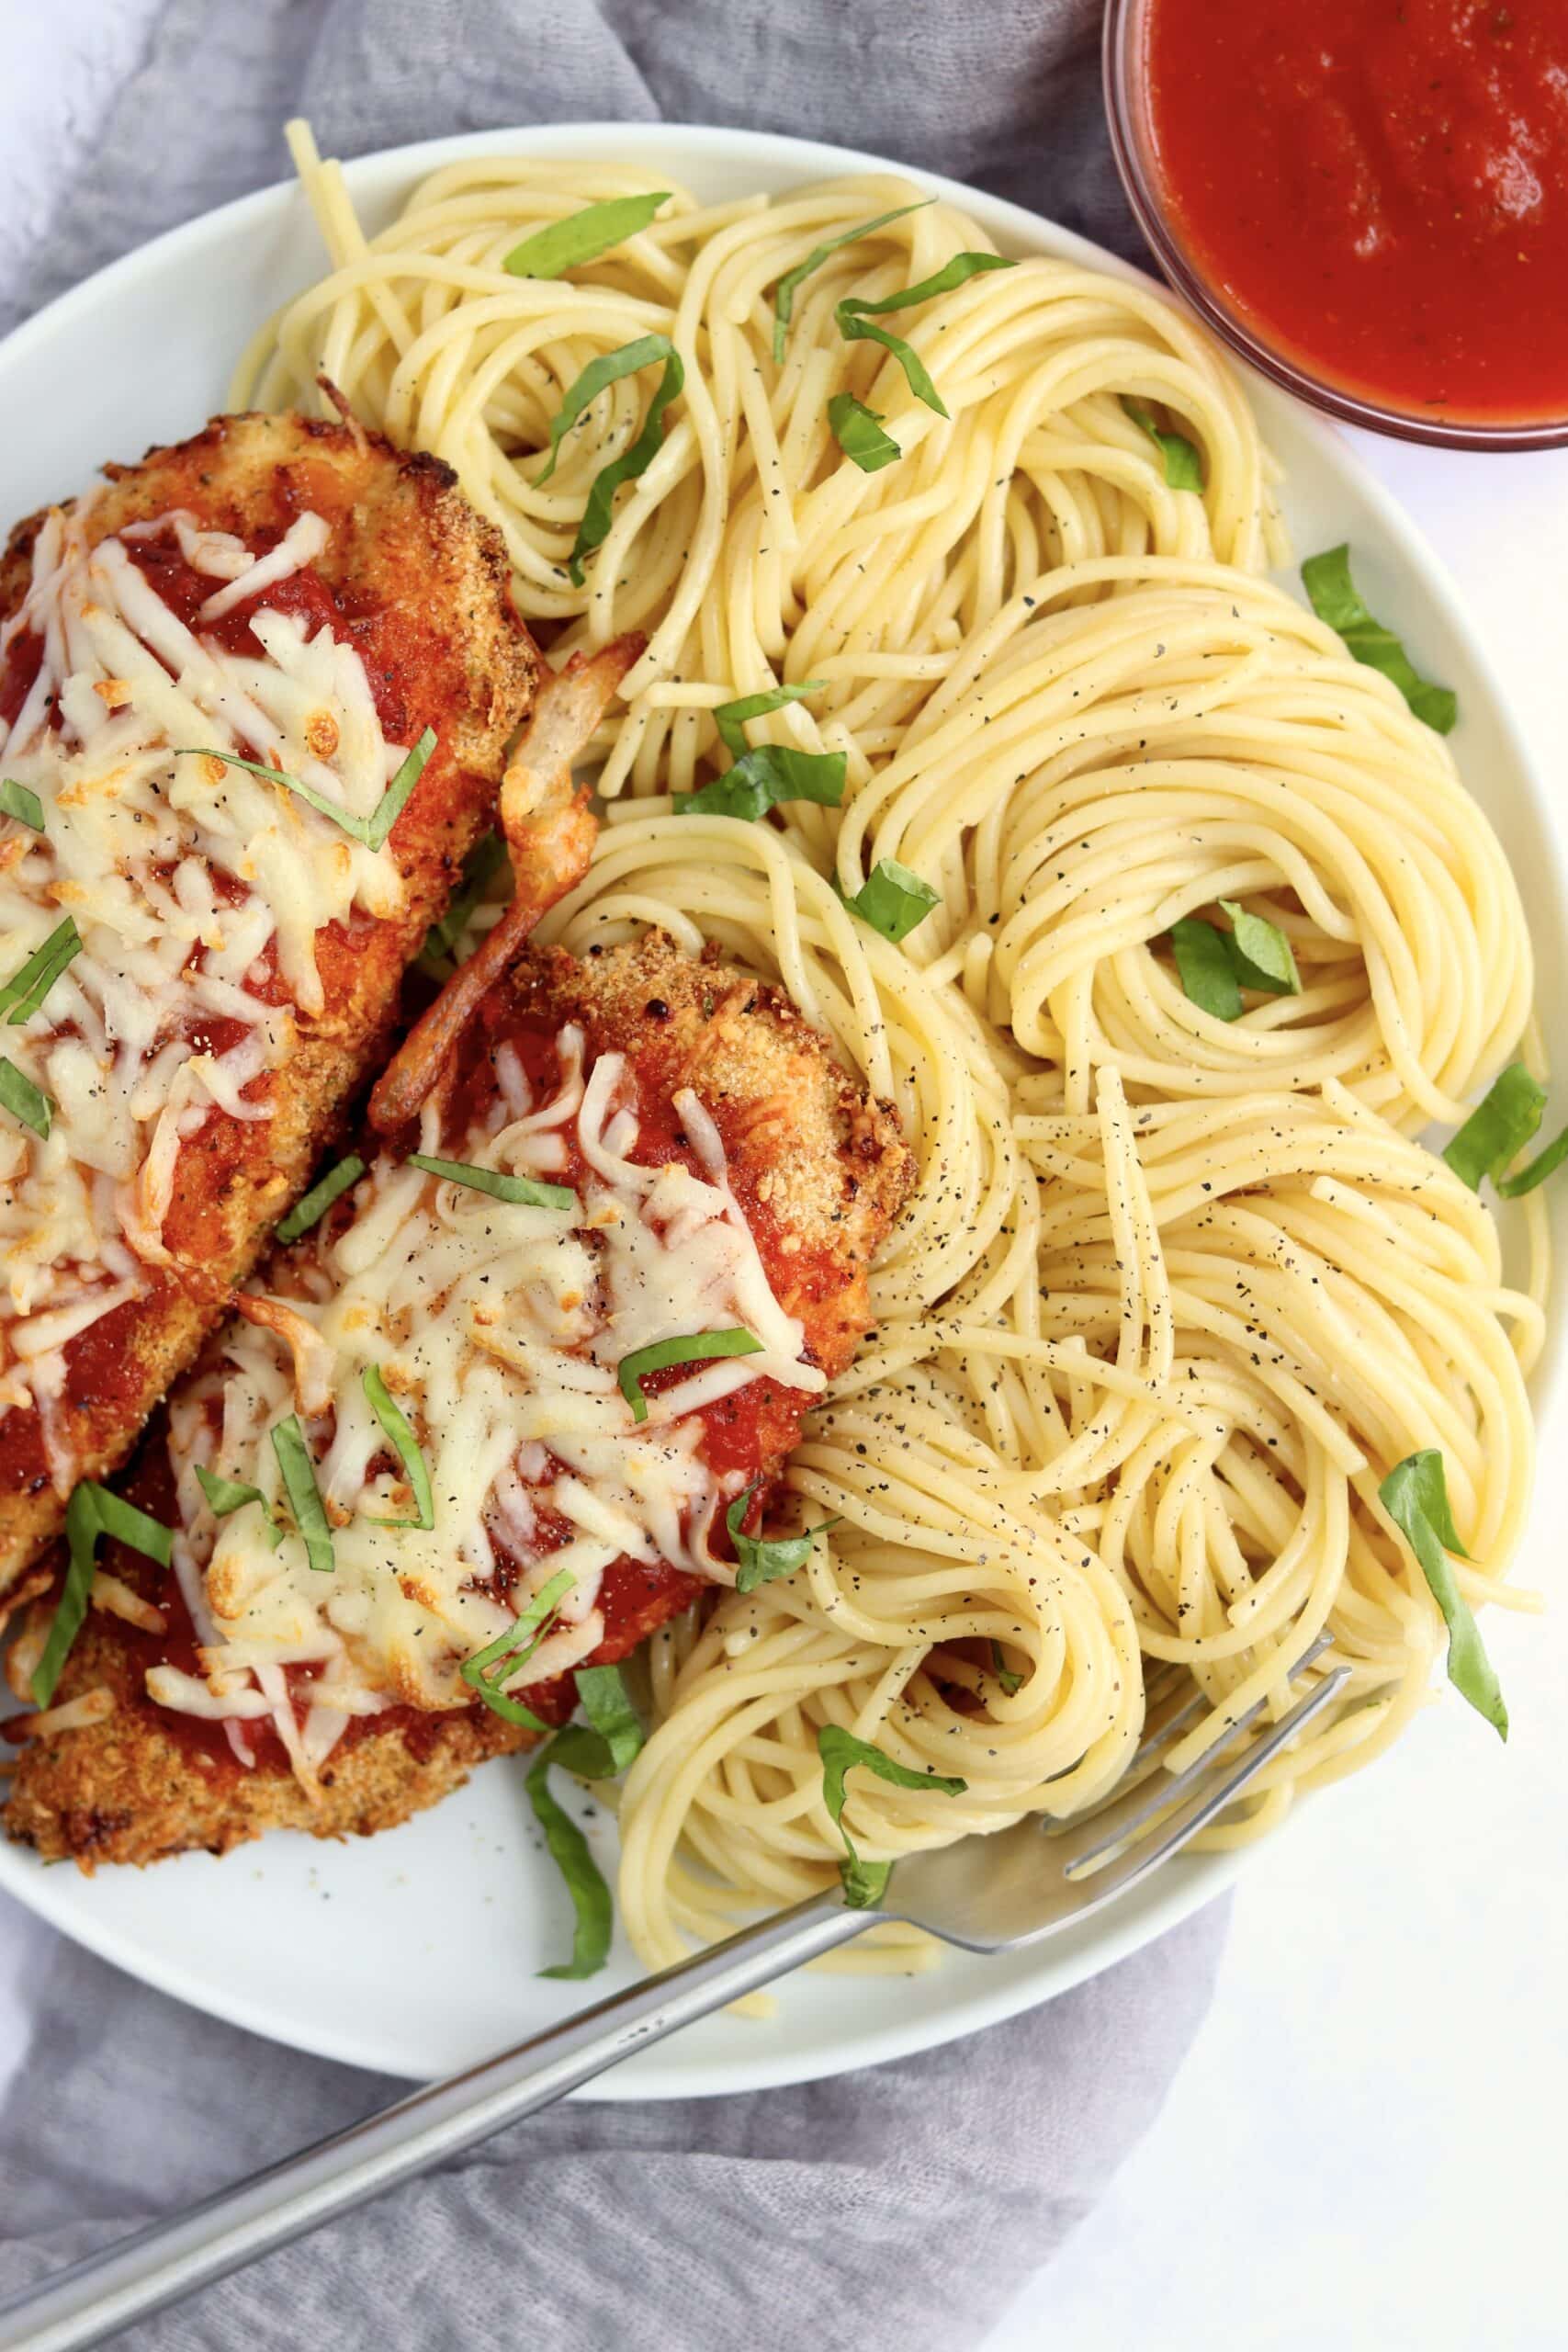 Plate of air fryer chicken parmesan with pasta